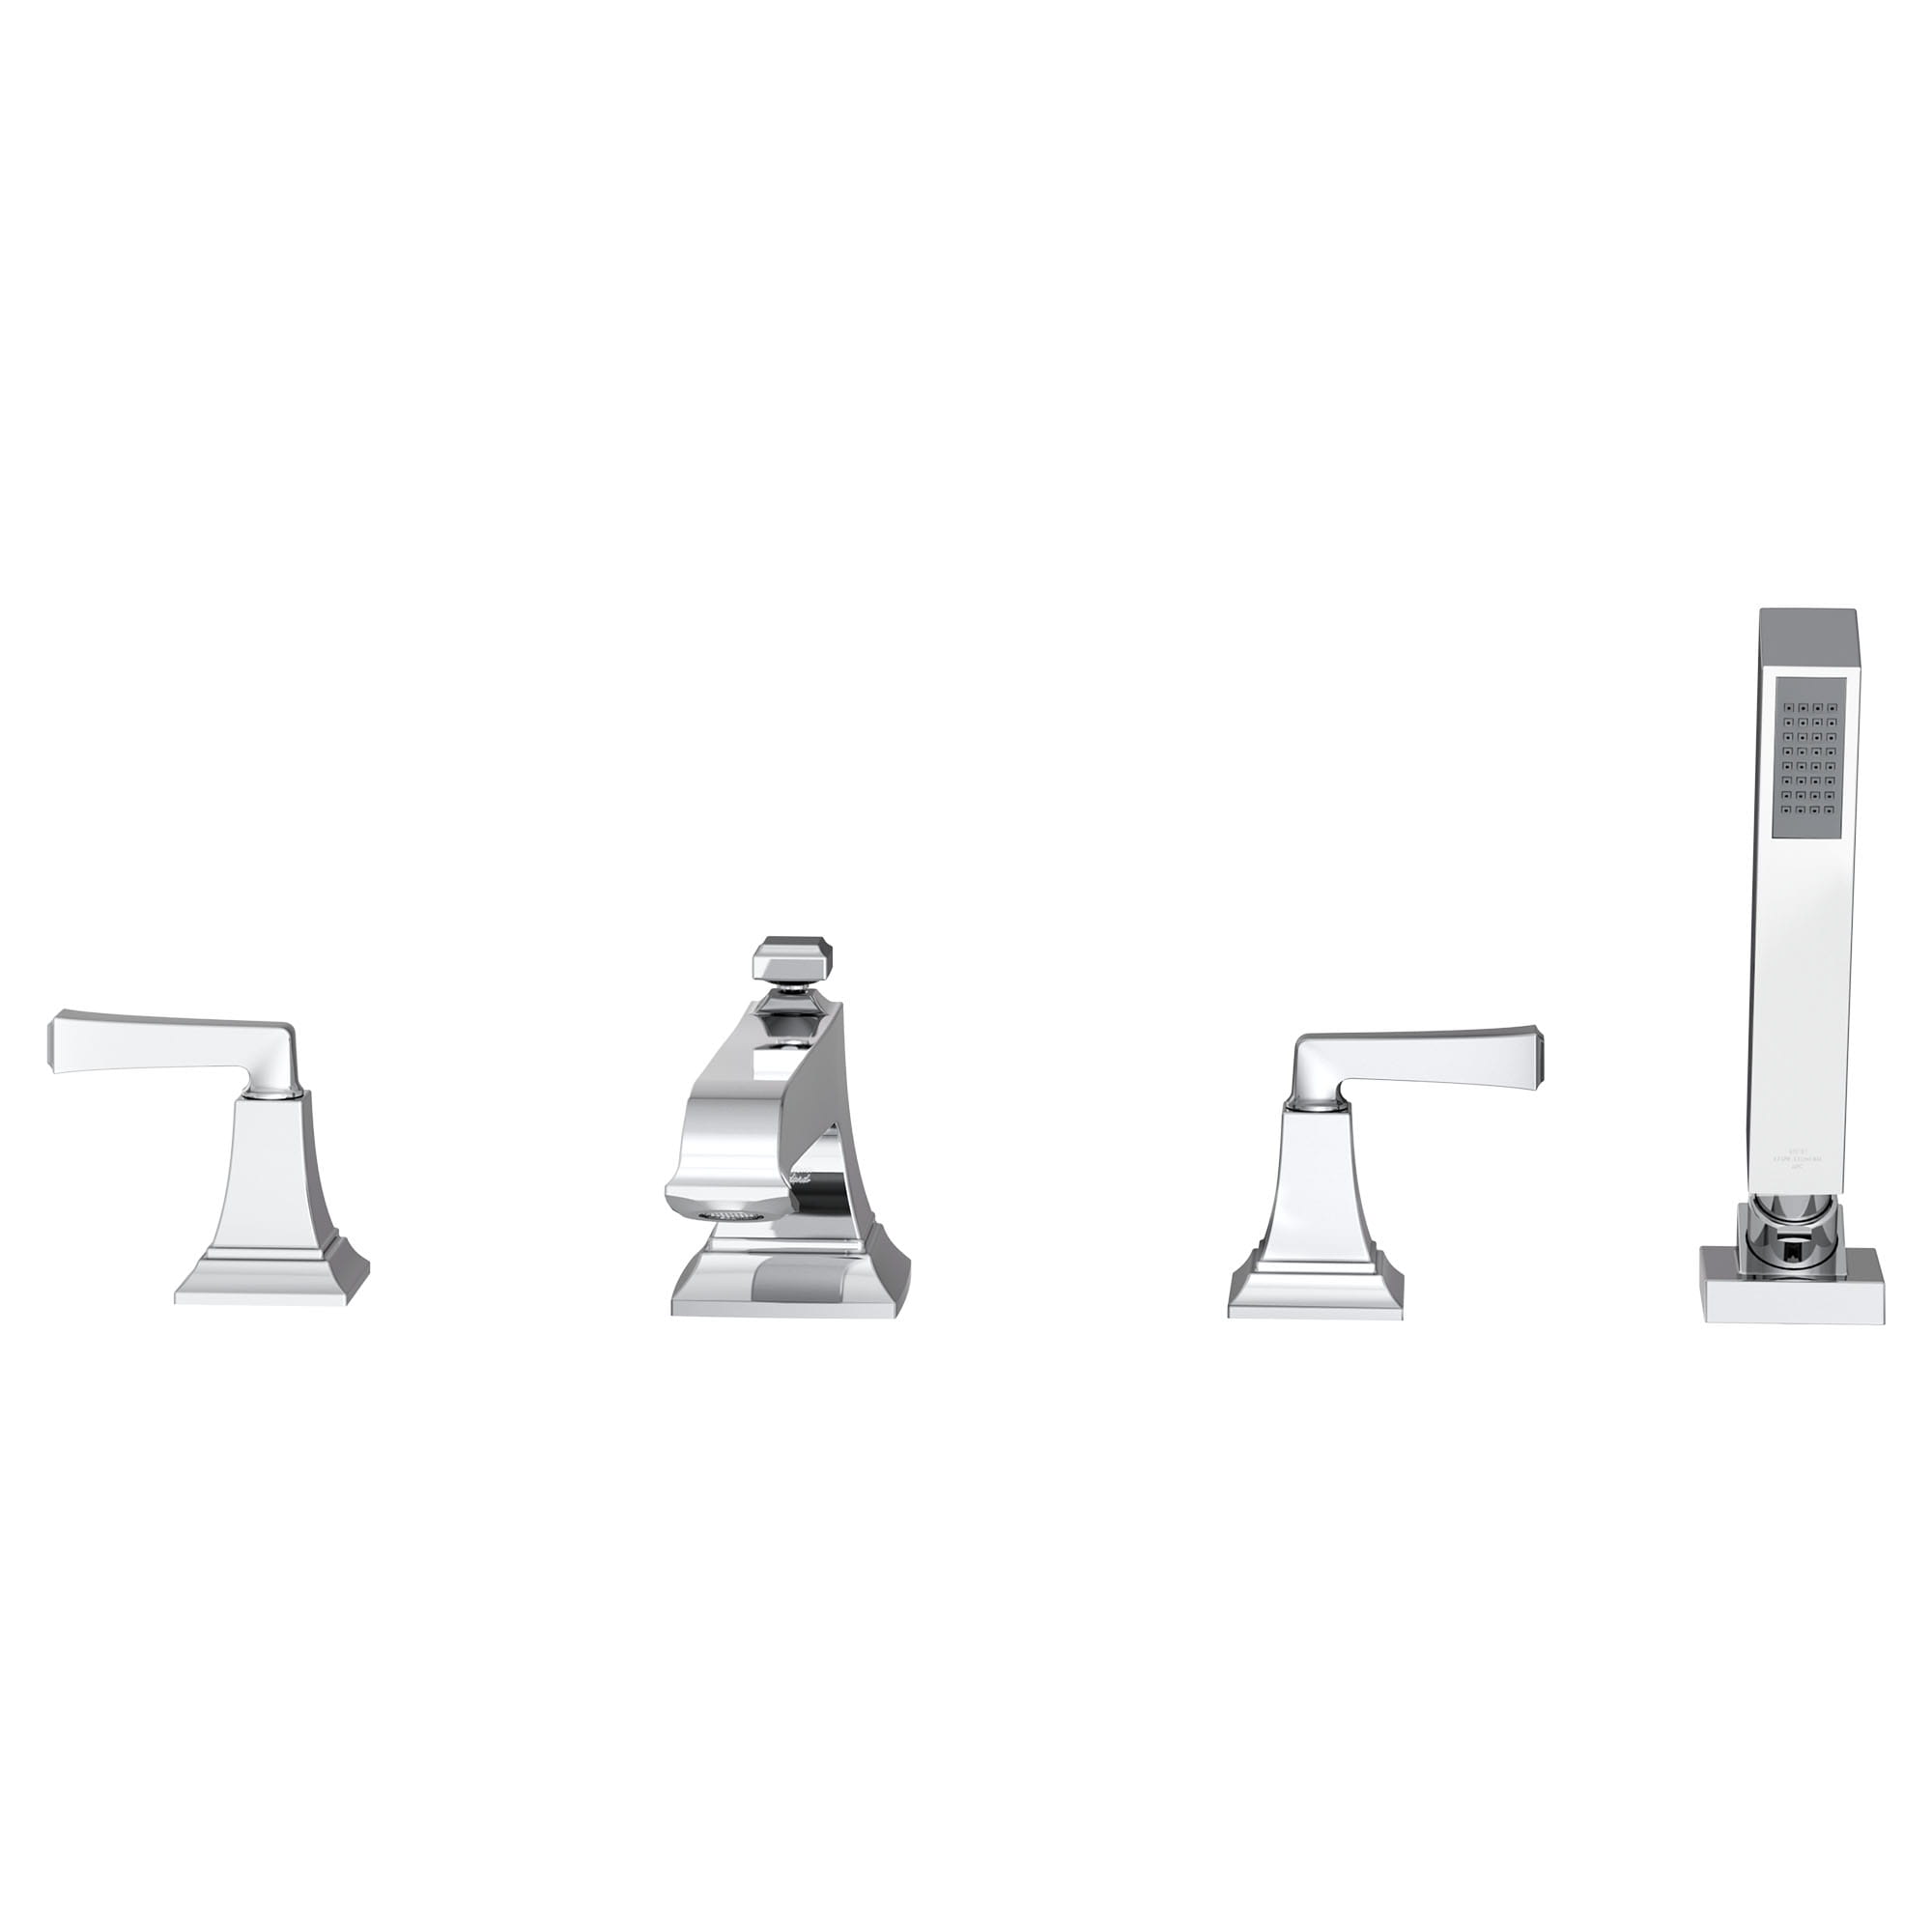 Town Square S Bathub Faucet With Lever Handles and Personal Shower for Flash Rough in Valve CHROME